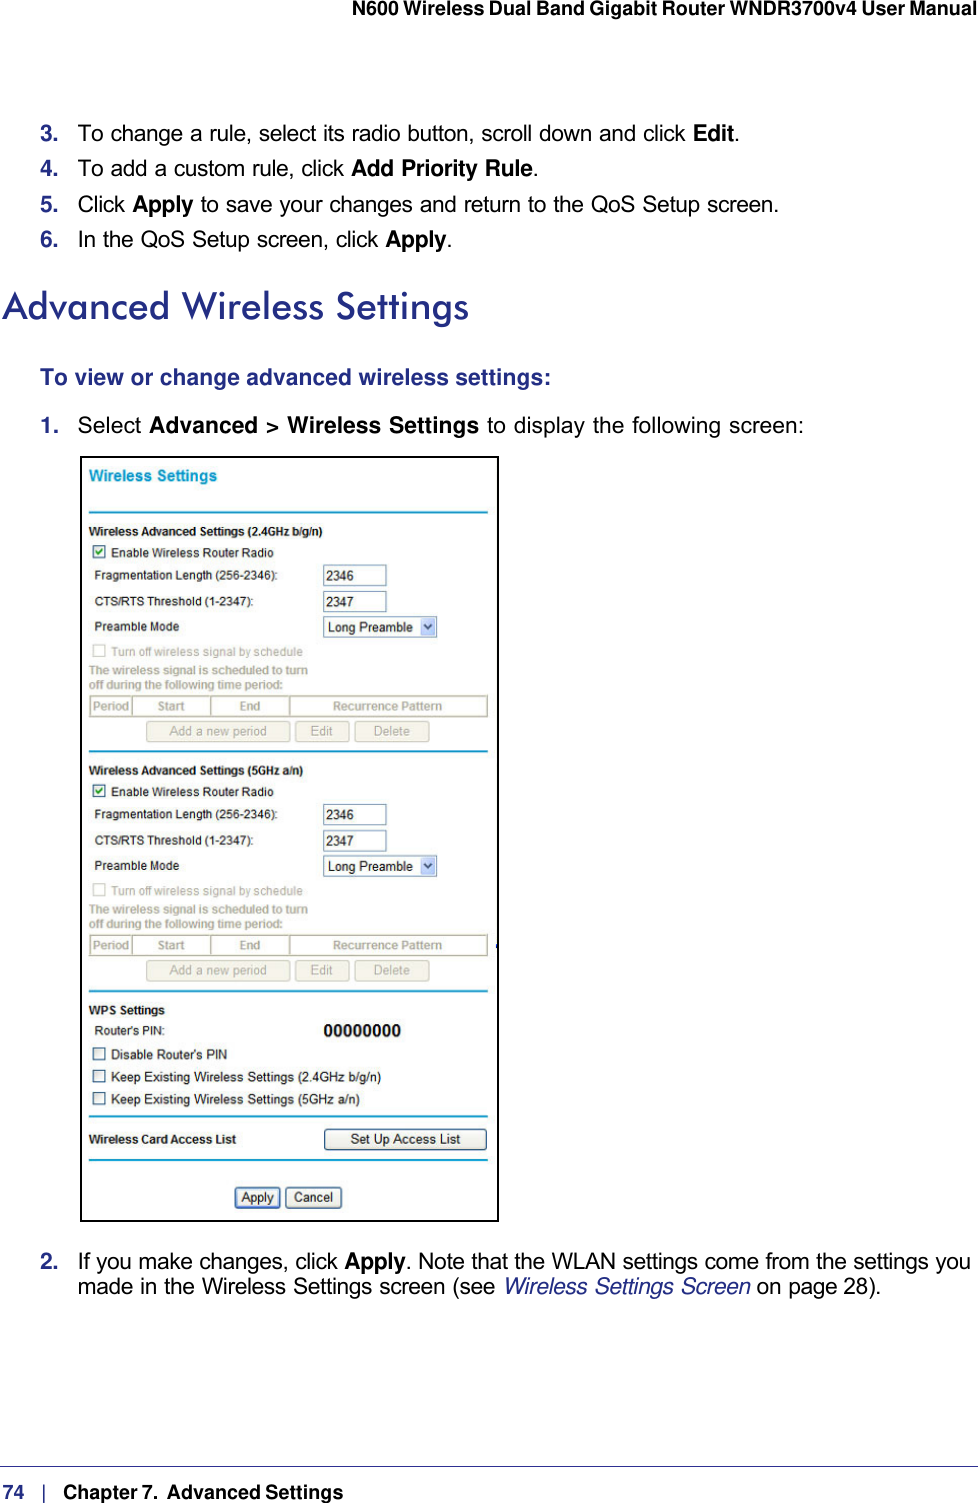 74   |   Chapter 7.  Advanced Settings  N600 Wireless Dual Band Gigabit Router WNDR3700v4 User Manual 3.  To change a rule, select its radio button, scroll down and click Edit.4.  To add a custom rule, click Add Priority Rule.5.  Click Apply to save your changes and return to the QoS Setup screen.6.  In the QoS Setup screen, click Apply.Advanced Wireless SettingsTo view or change advanced wireless settings:1.  Select Advanced &gt; Wireless Settings to display the following screen:2.  If you make changes, click Apply. Note that the WLAN settings come from the settings you made in the Wireless Settings screen (see Wireless Settings Screen on page 28).